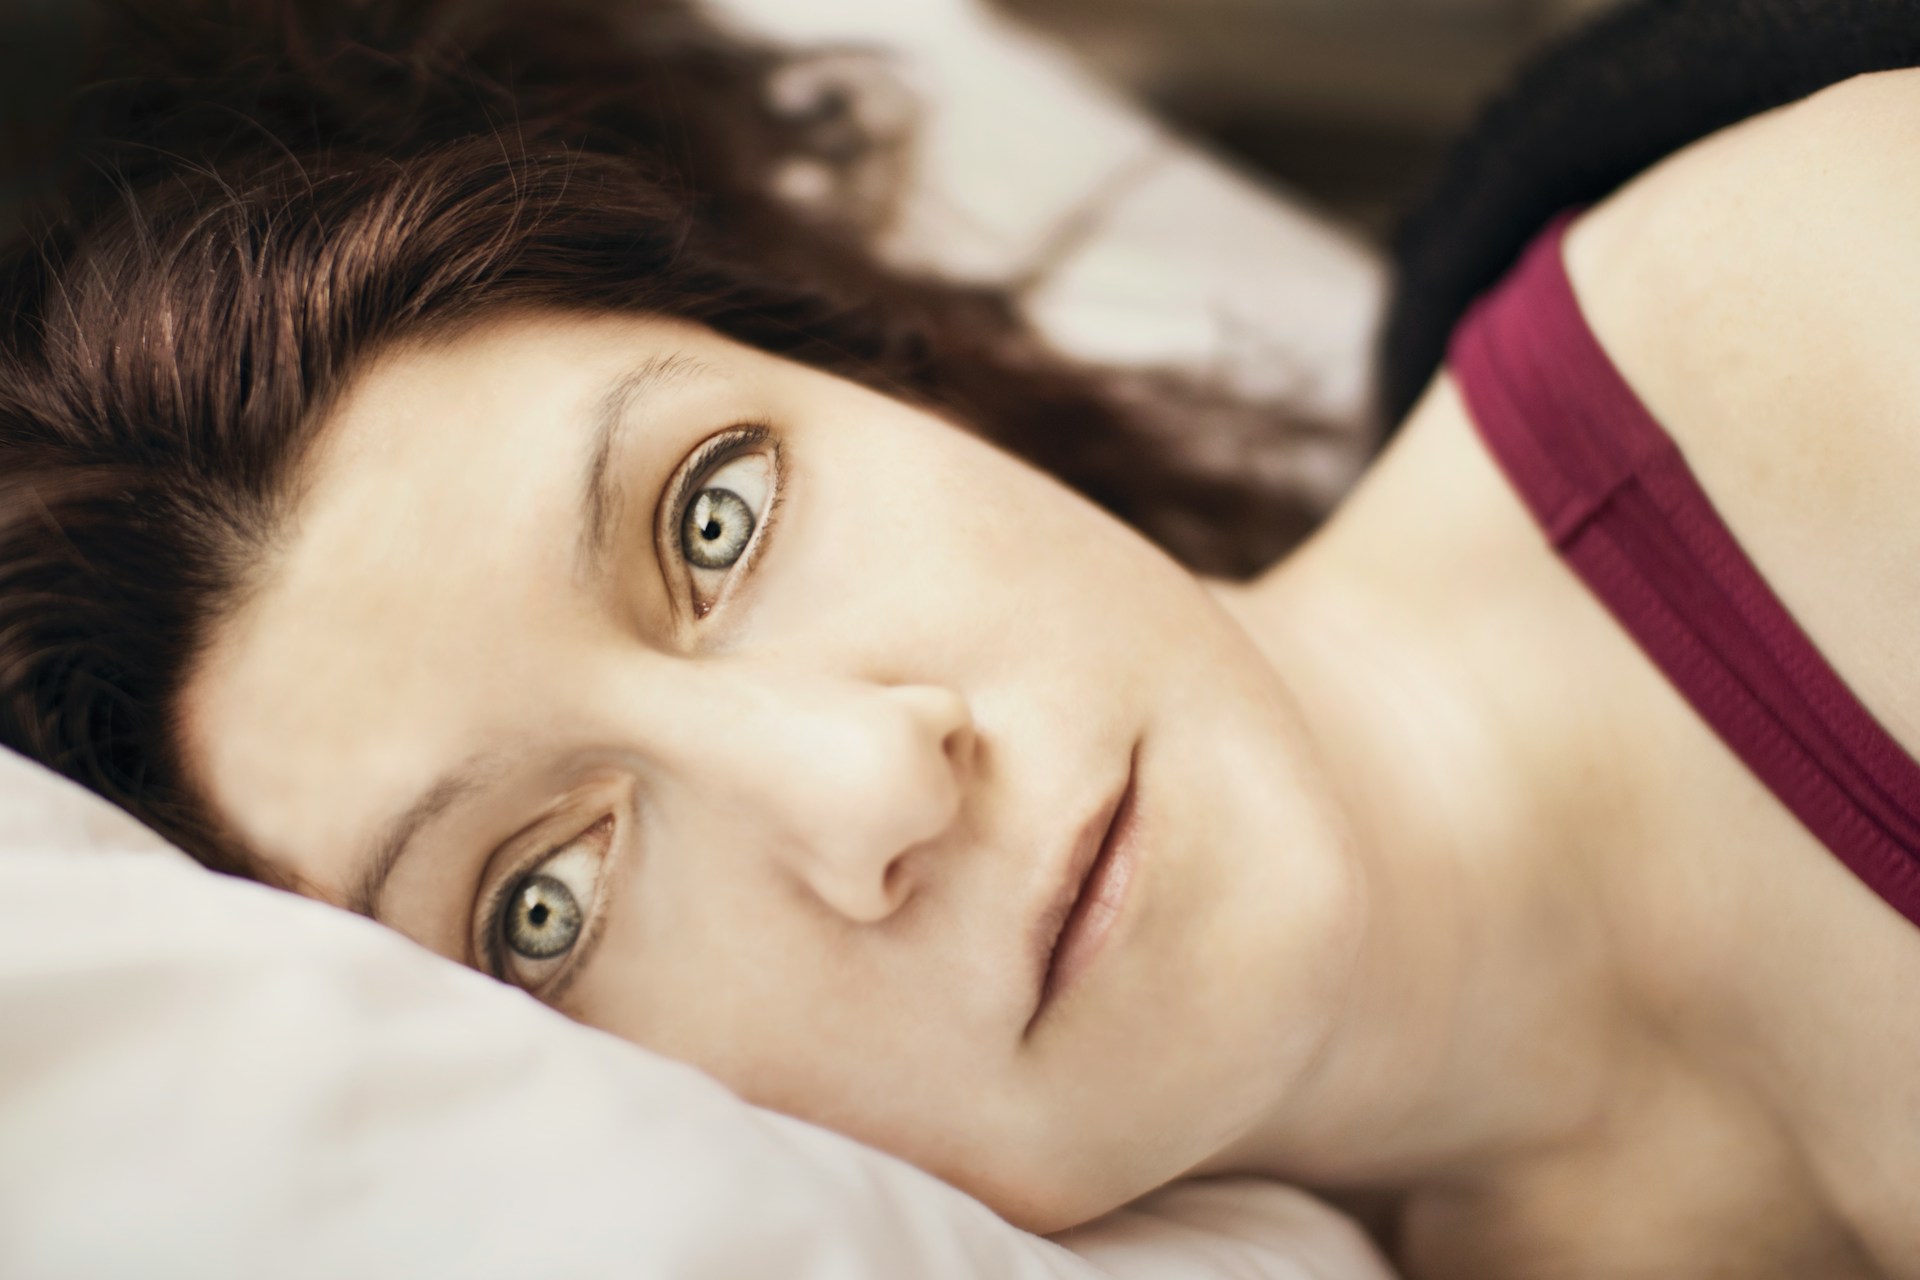 A woman lying wide awake in bed